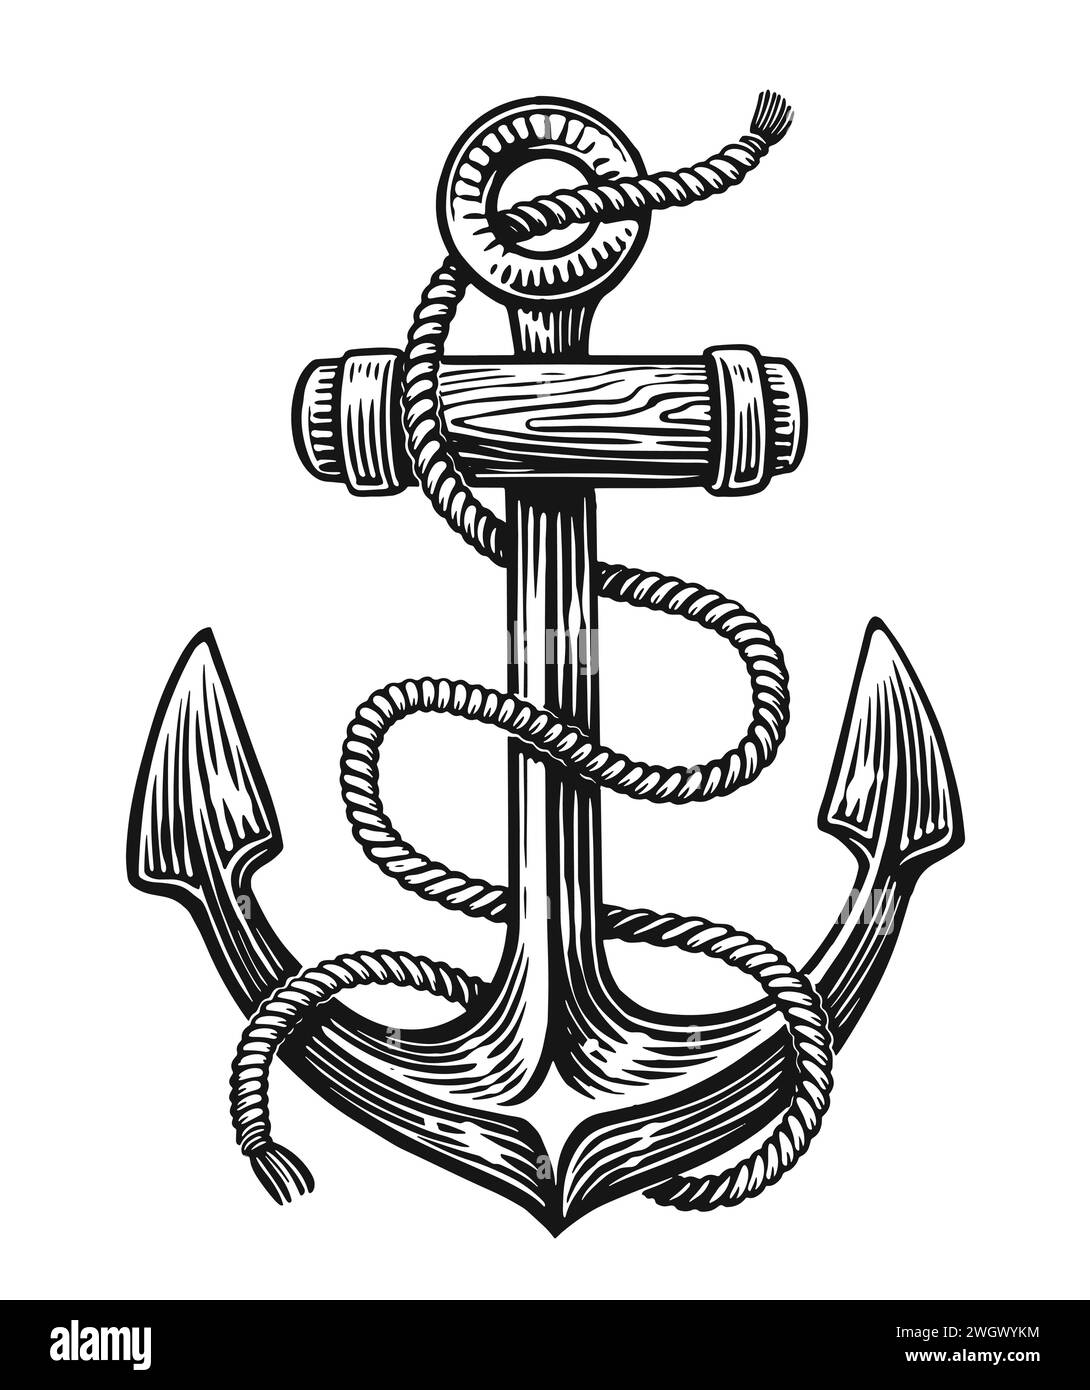 Hand drawn ship sea Anchor with rope. Sketch vintage vector illustration Stock Vector